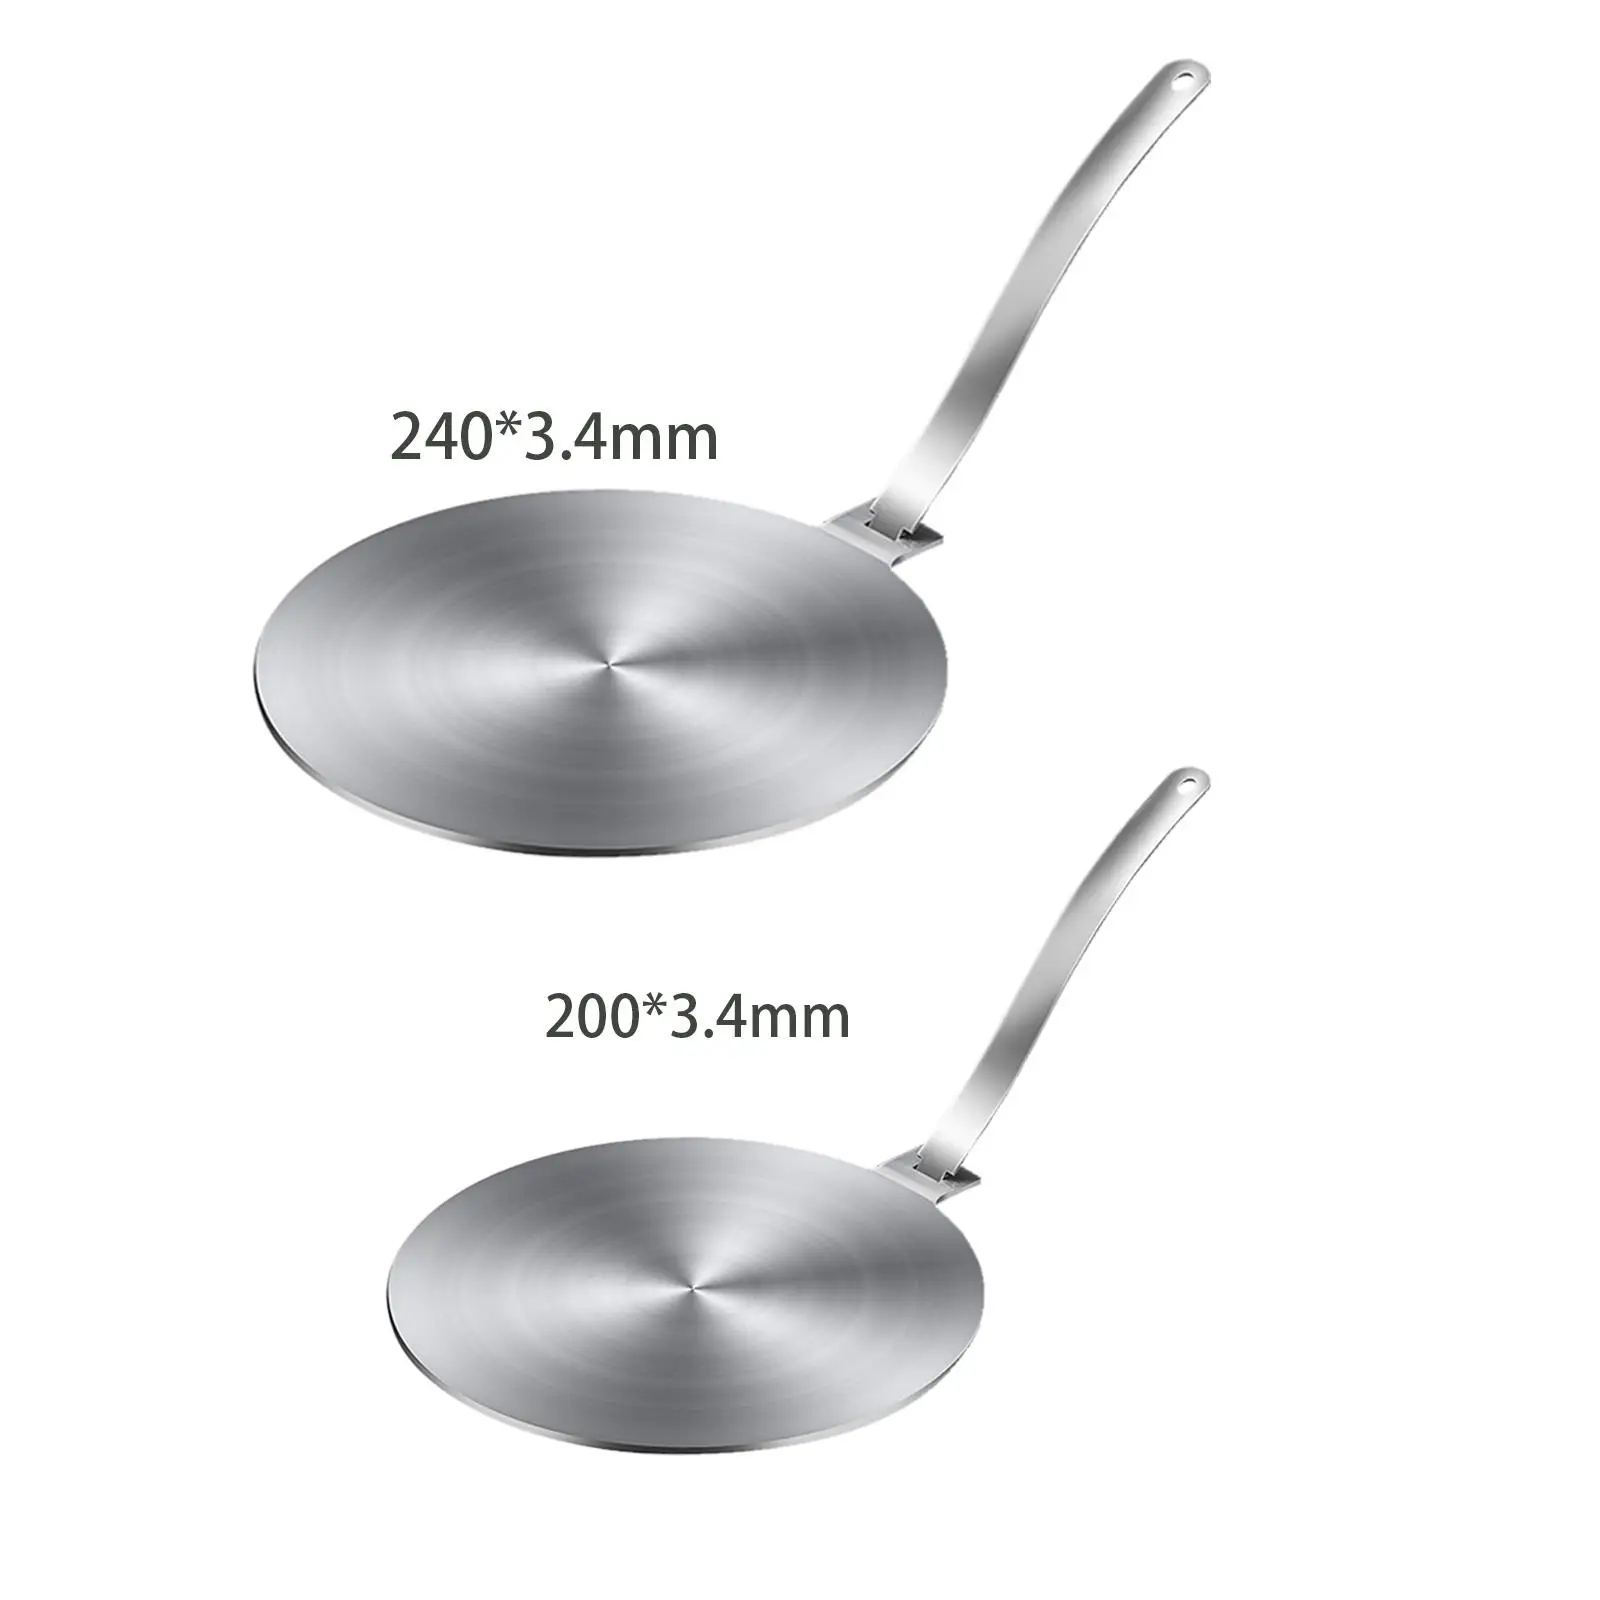 Stainless Steel Plate Heat Diffuser Evenly Conduction plate for Kitchen Stove Accessories